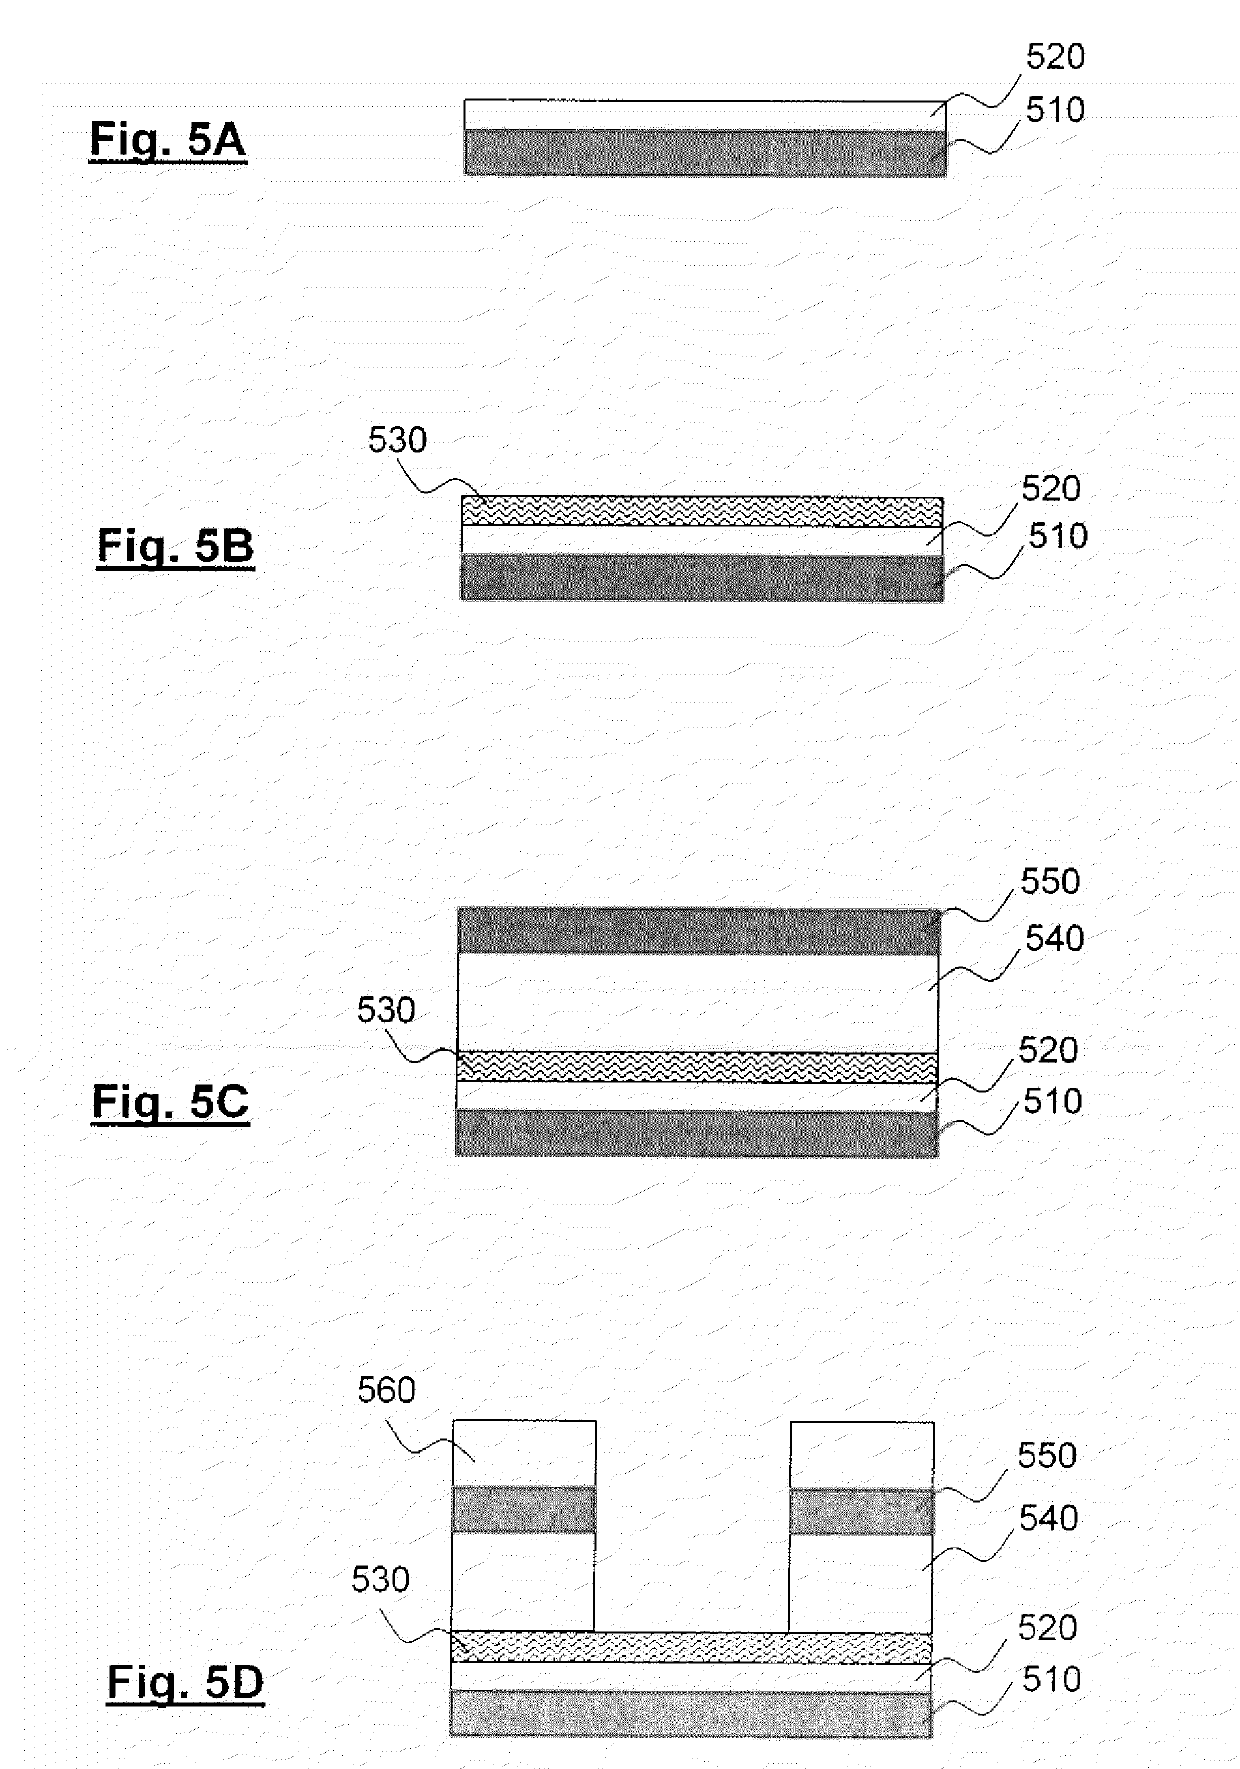 Procedure for Obtaining Nanotube Layers of Carbon with Conductor or Semiconductor Substrate